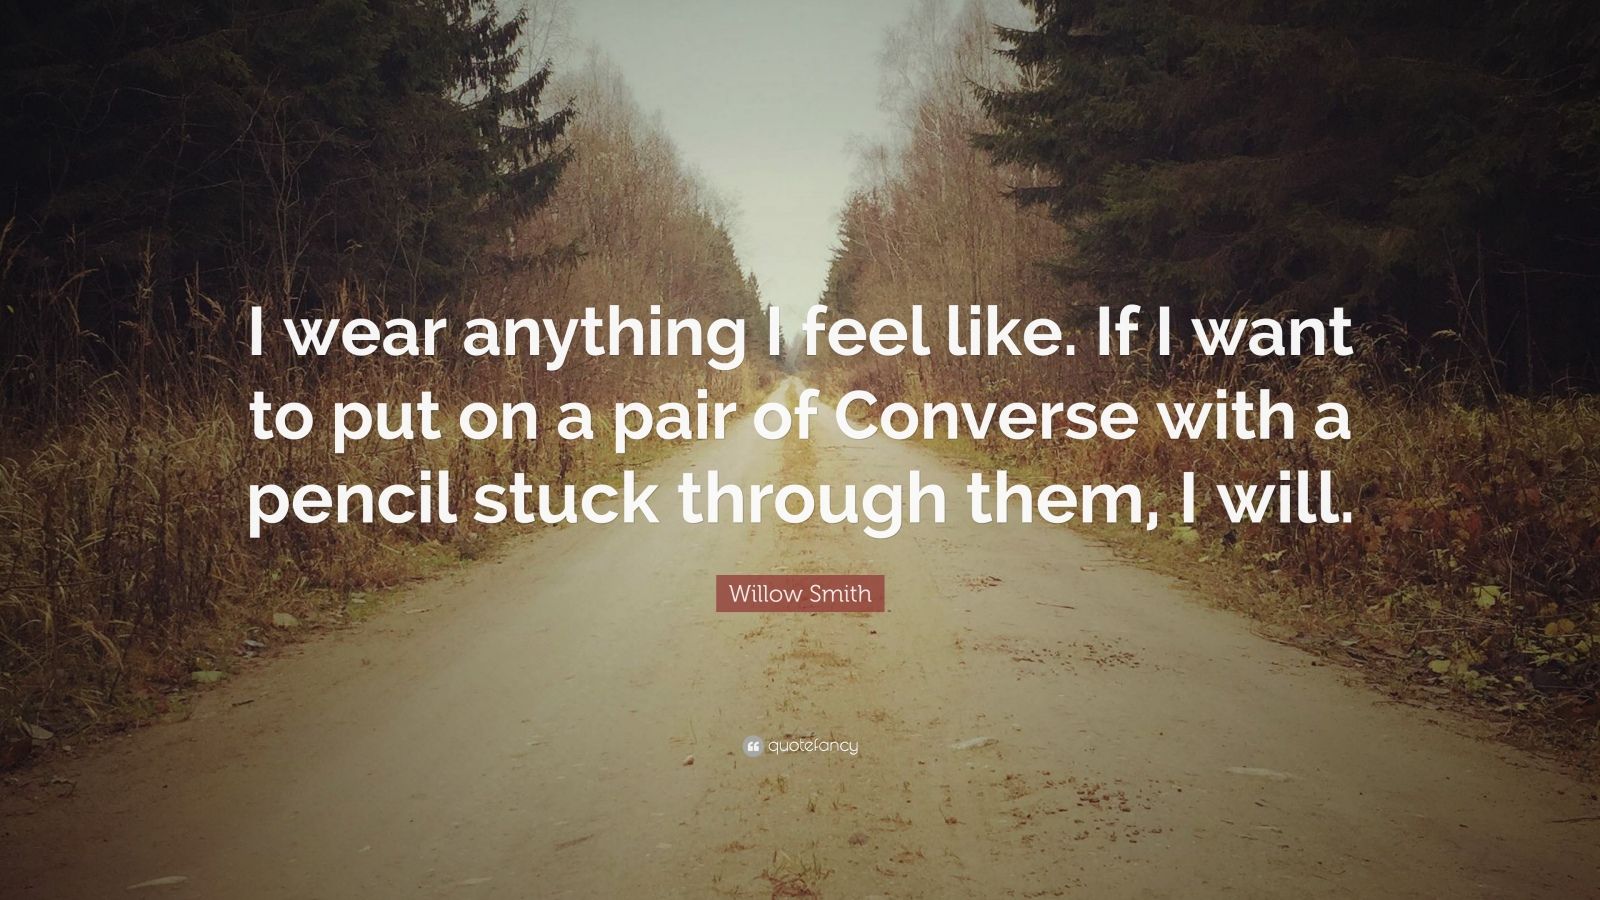 Willow Smith Quote: "I wear anything I feel like. If I want to put on a pair of Converse with a ...